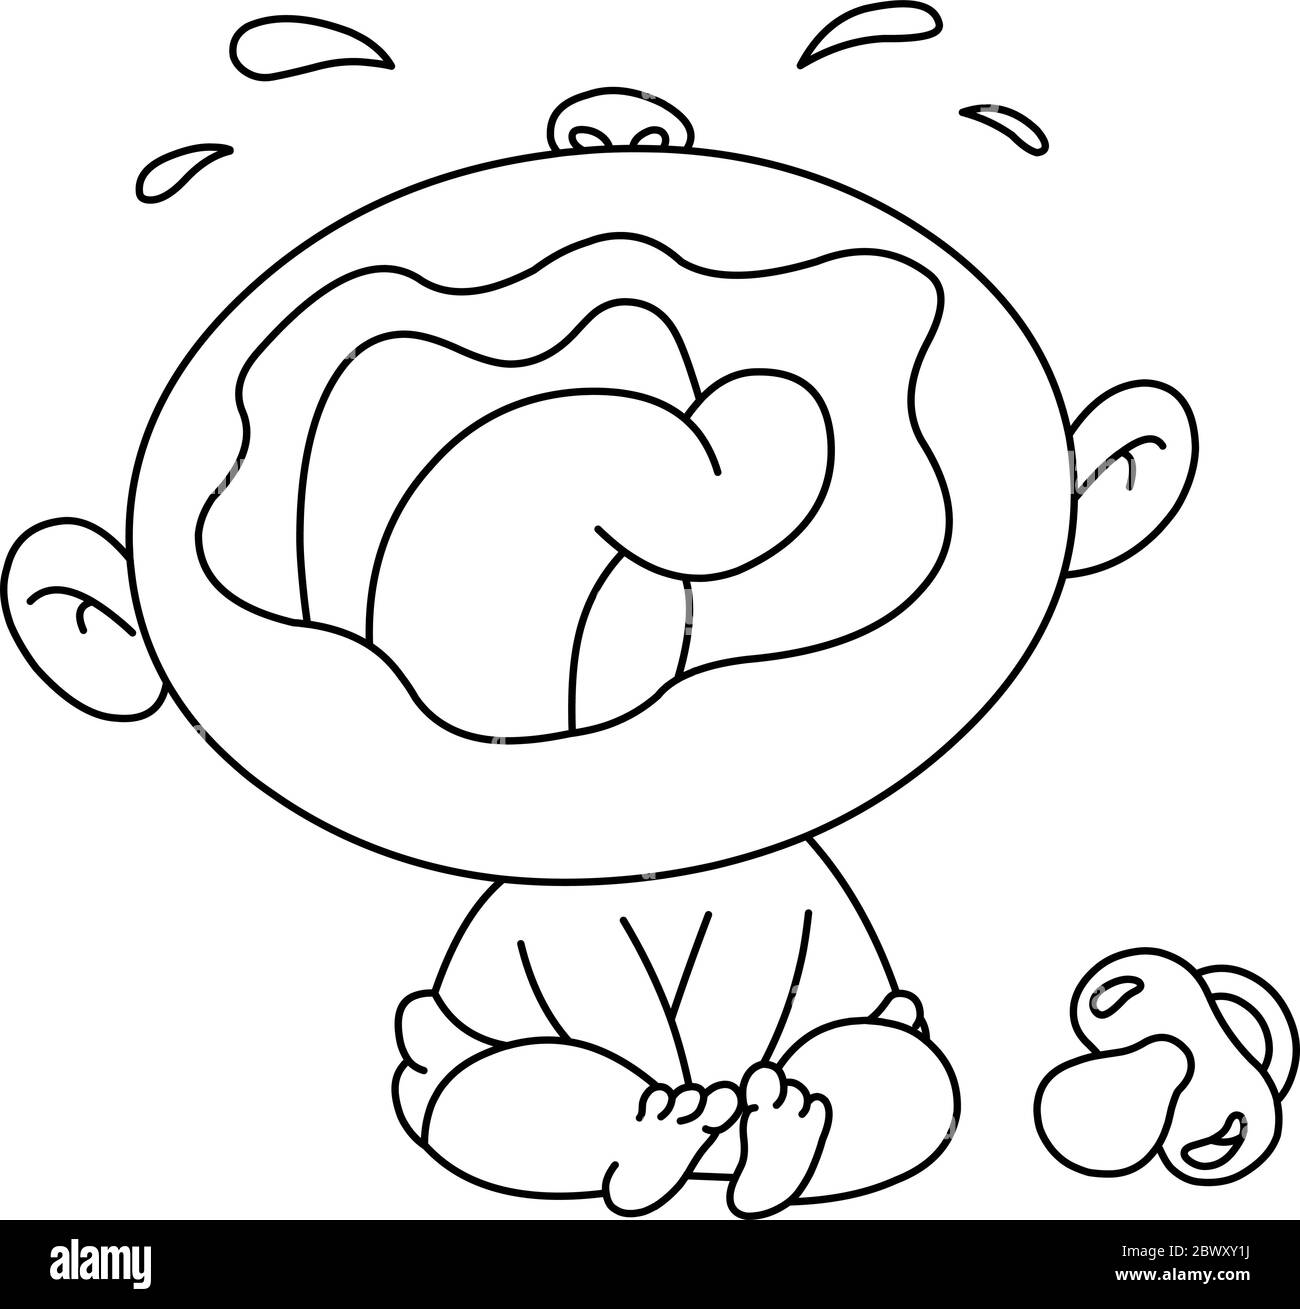 Outlined crying baby. Vector illustration coloring page. Stock Vector